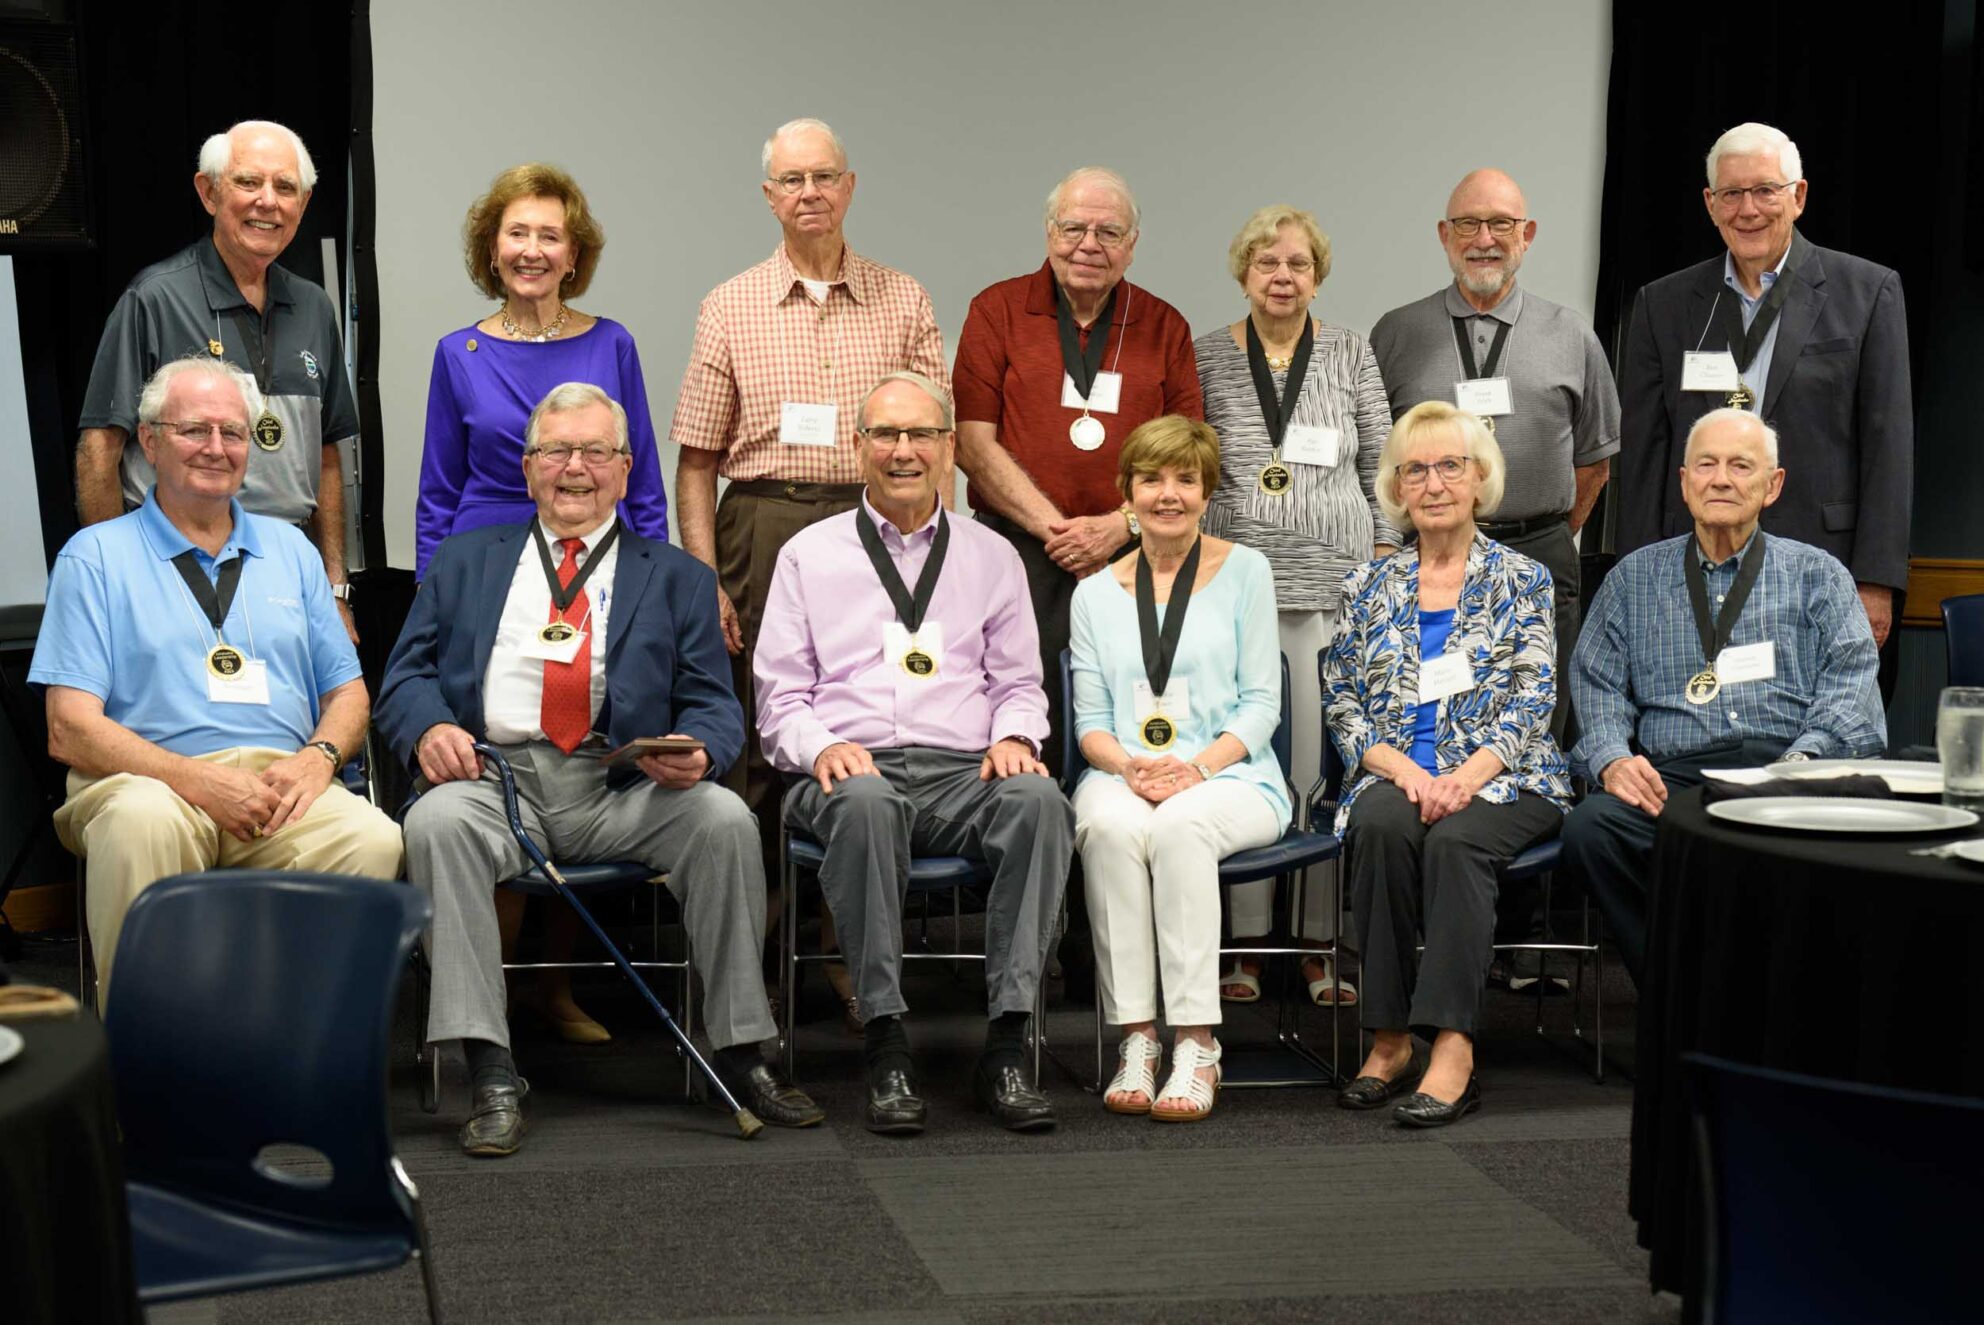 Junaluska Leadership Award honoreees with 2023 recipient George Fields front row second from left (Photo by Lisa Stockton Howell)